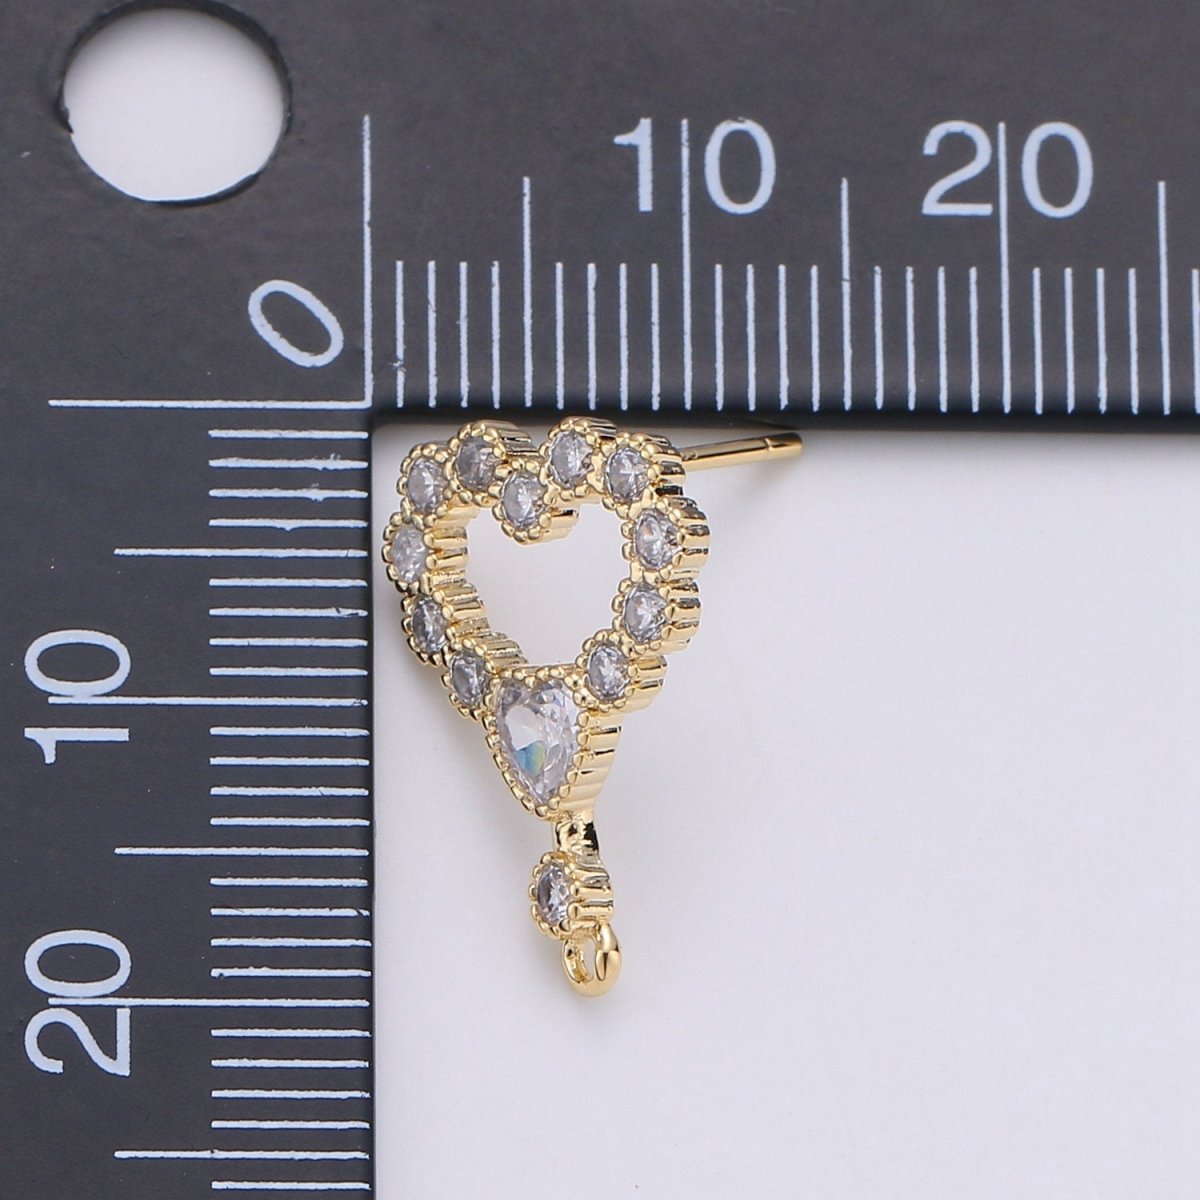 Heart Stud Earring Charm • 24k Gold Filled• Micro Pave Heart • Jewelry Making Supplies • Open Ring Attached for Jewelry Making Supply, K-402 - DLUXCA